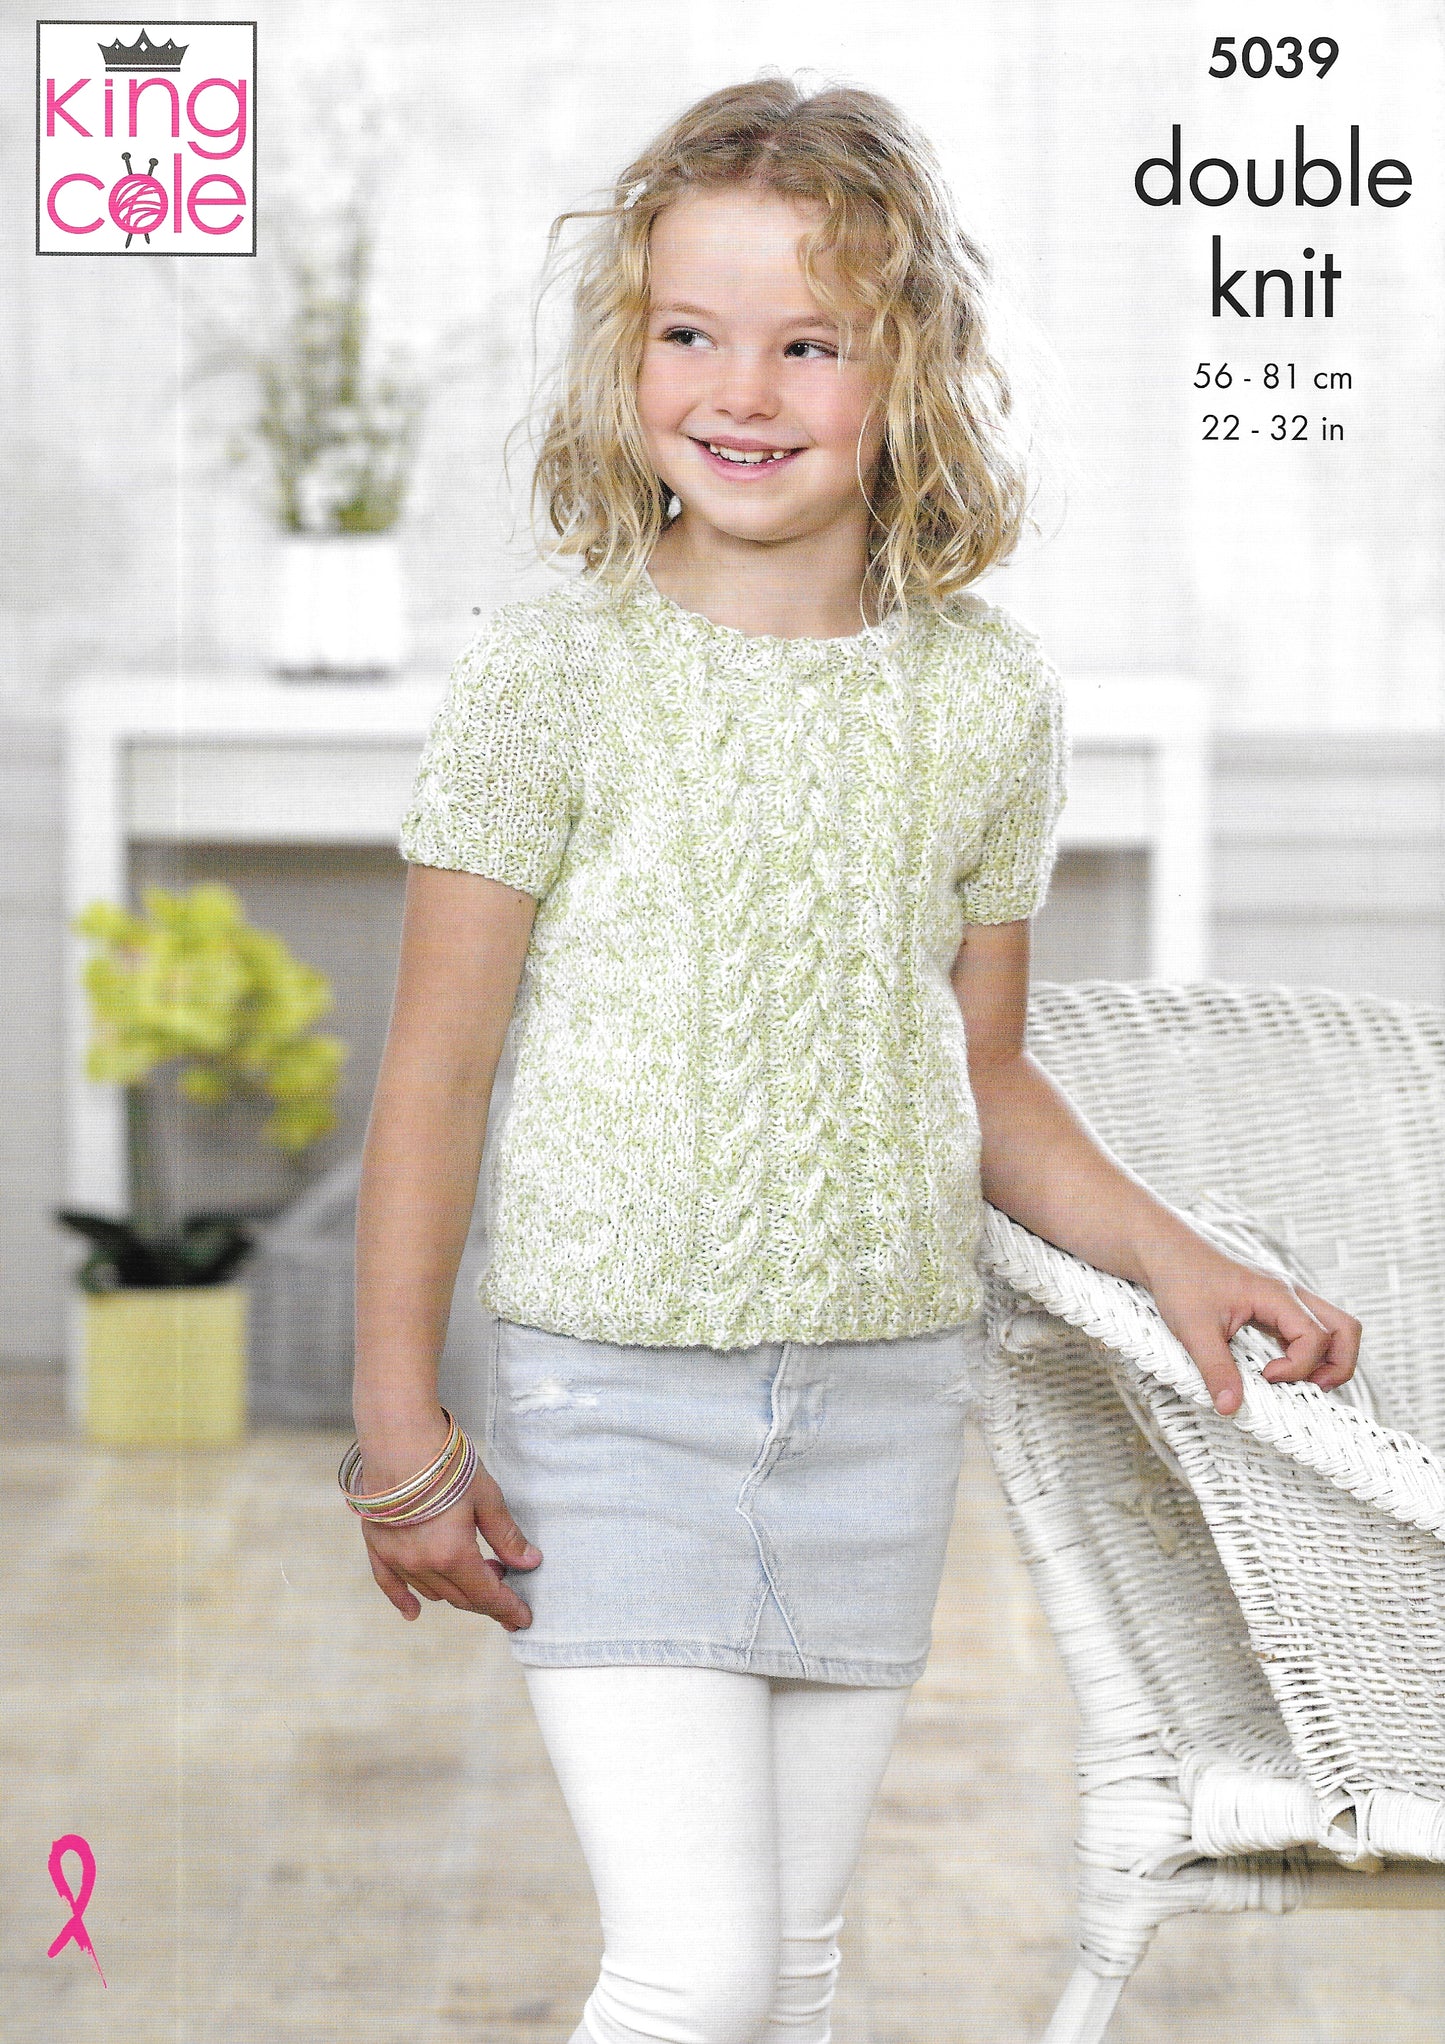 5039 King Cole double knit Top and Waistcoat knitting pattern